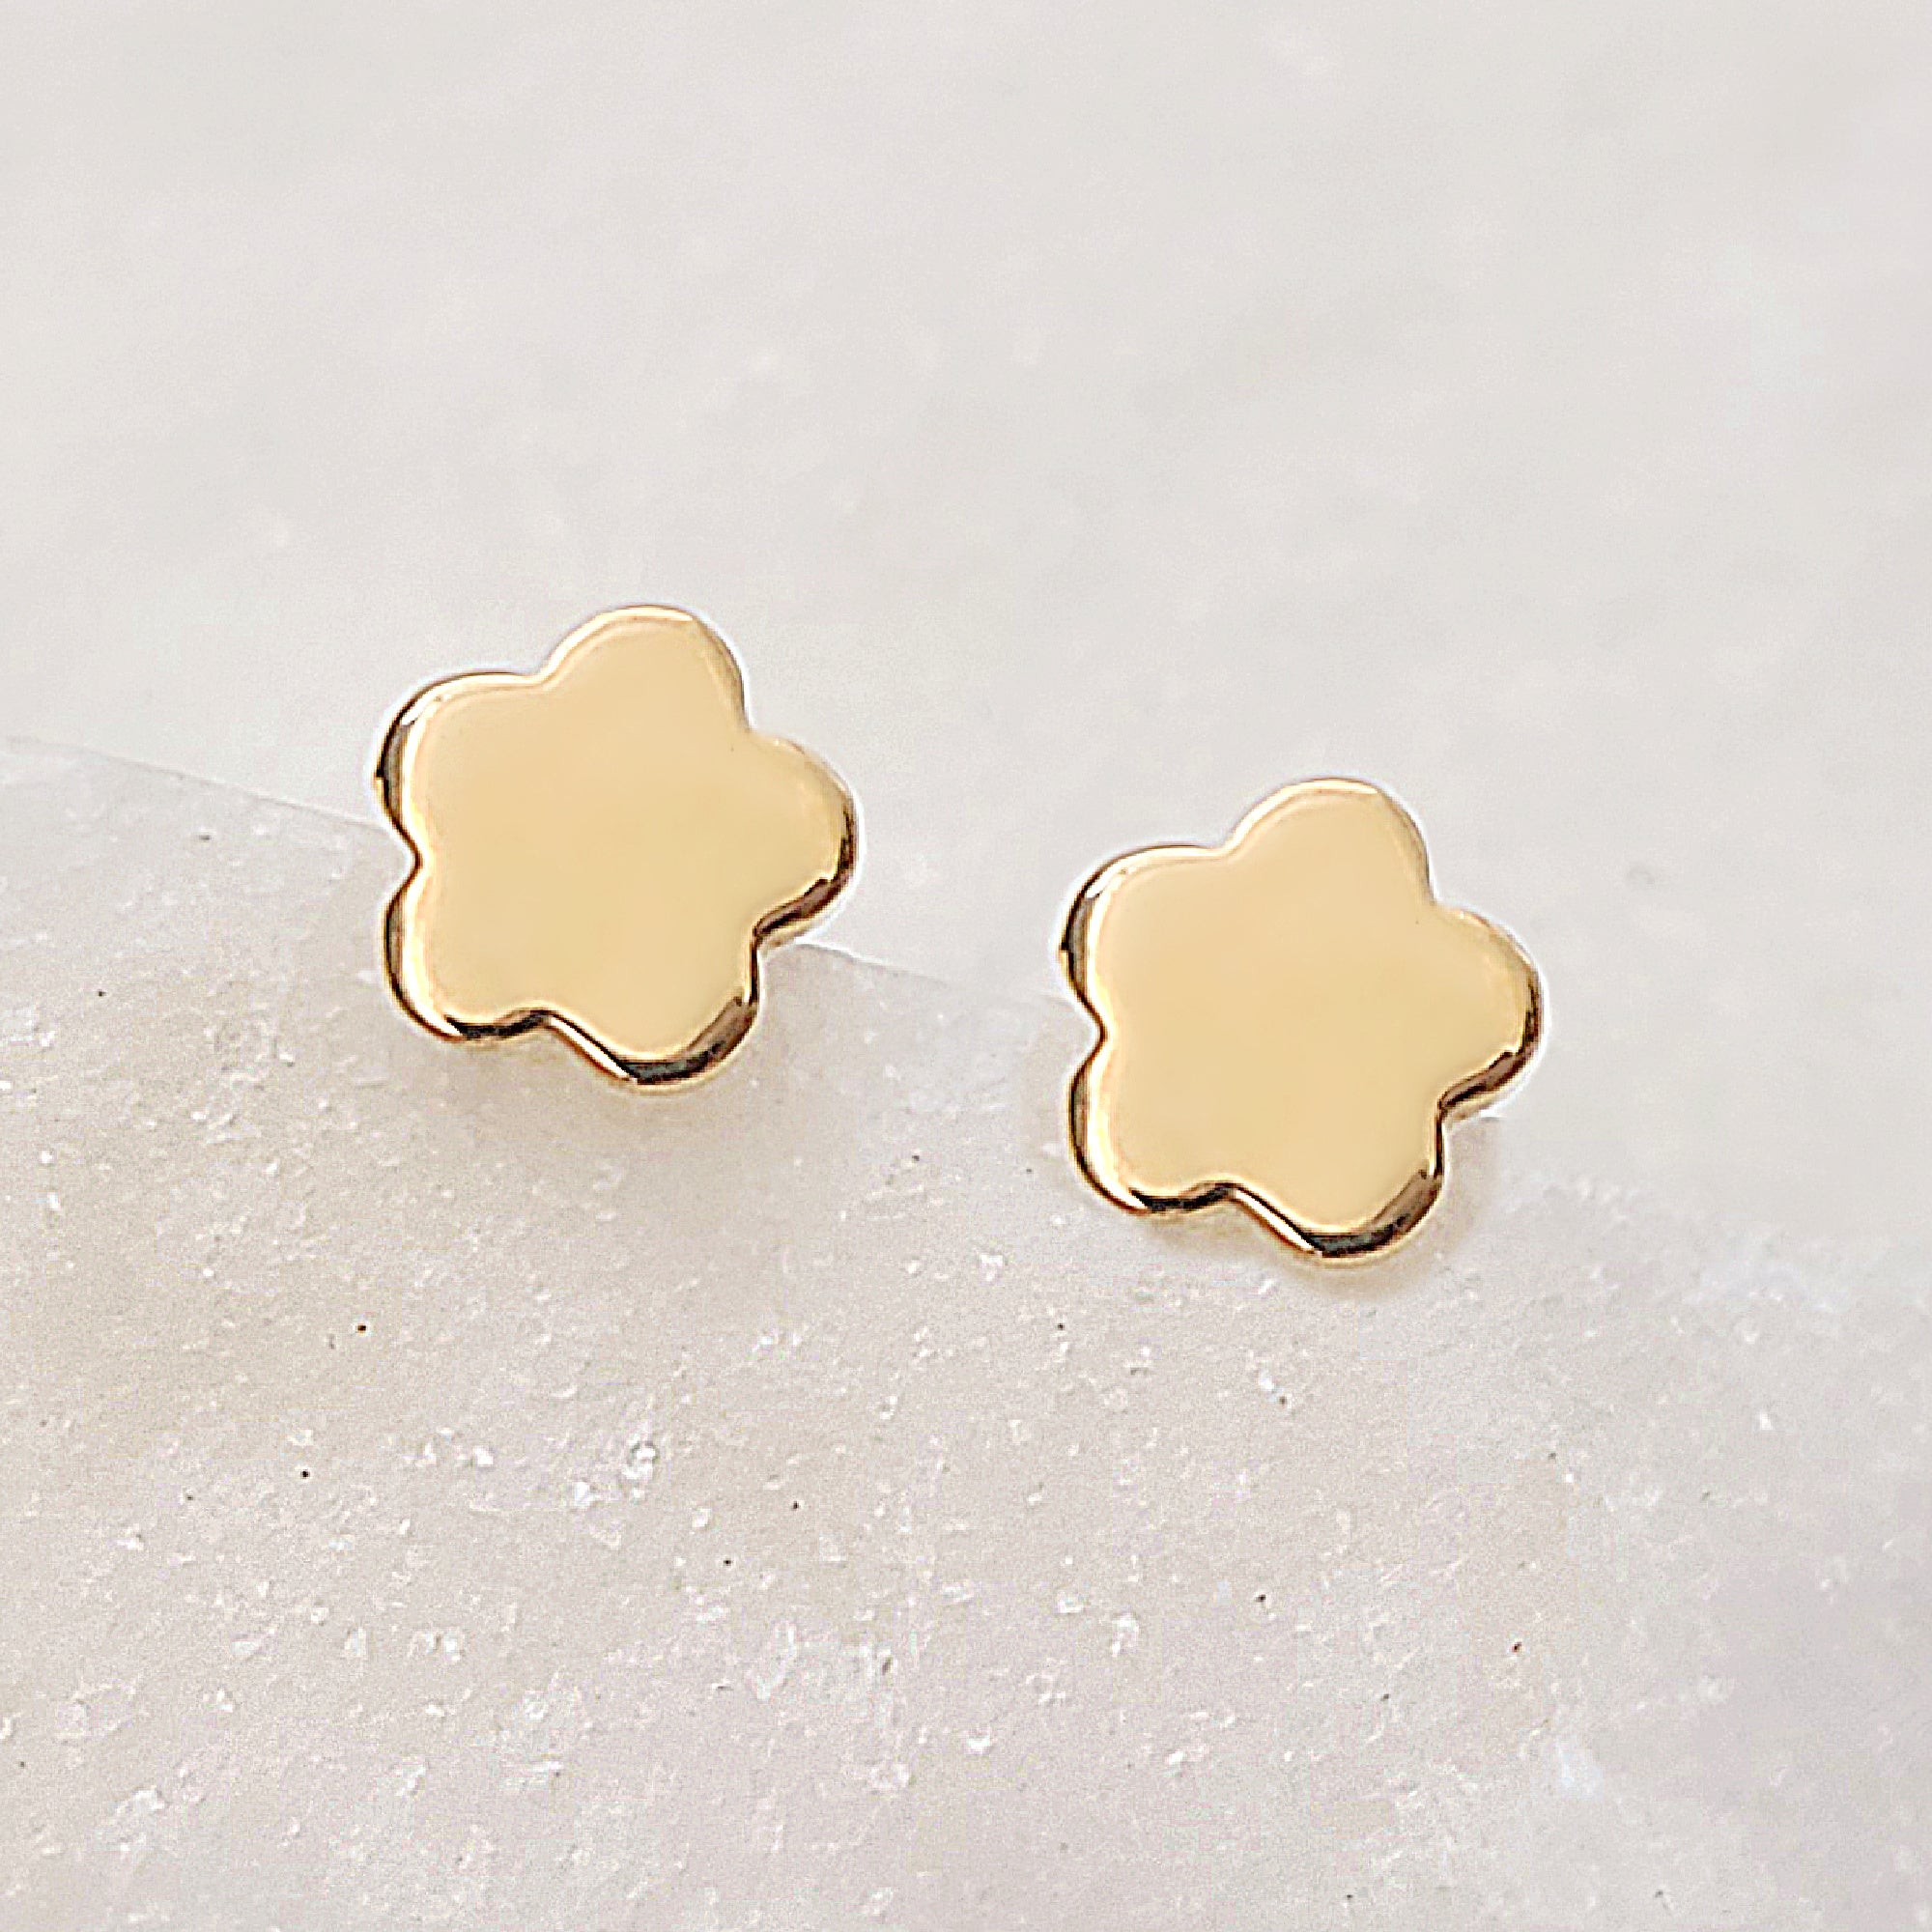 Image of 14K Minimalistic Daisy Earrings in Yellow Gold